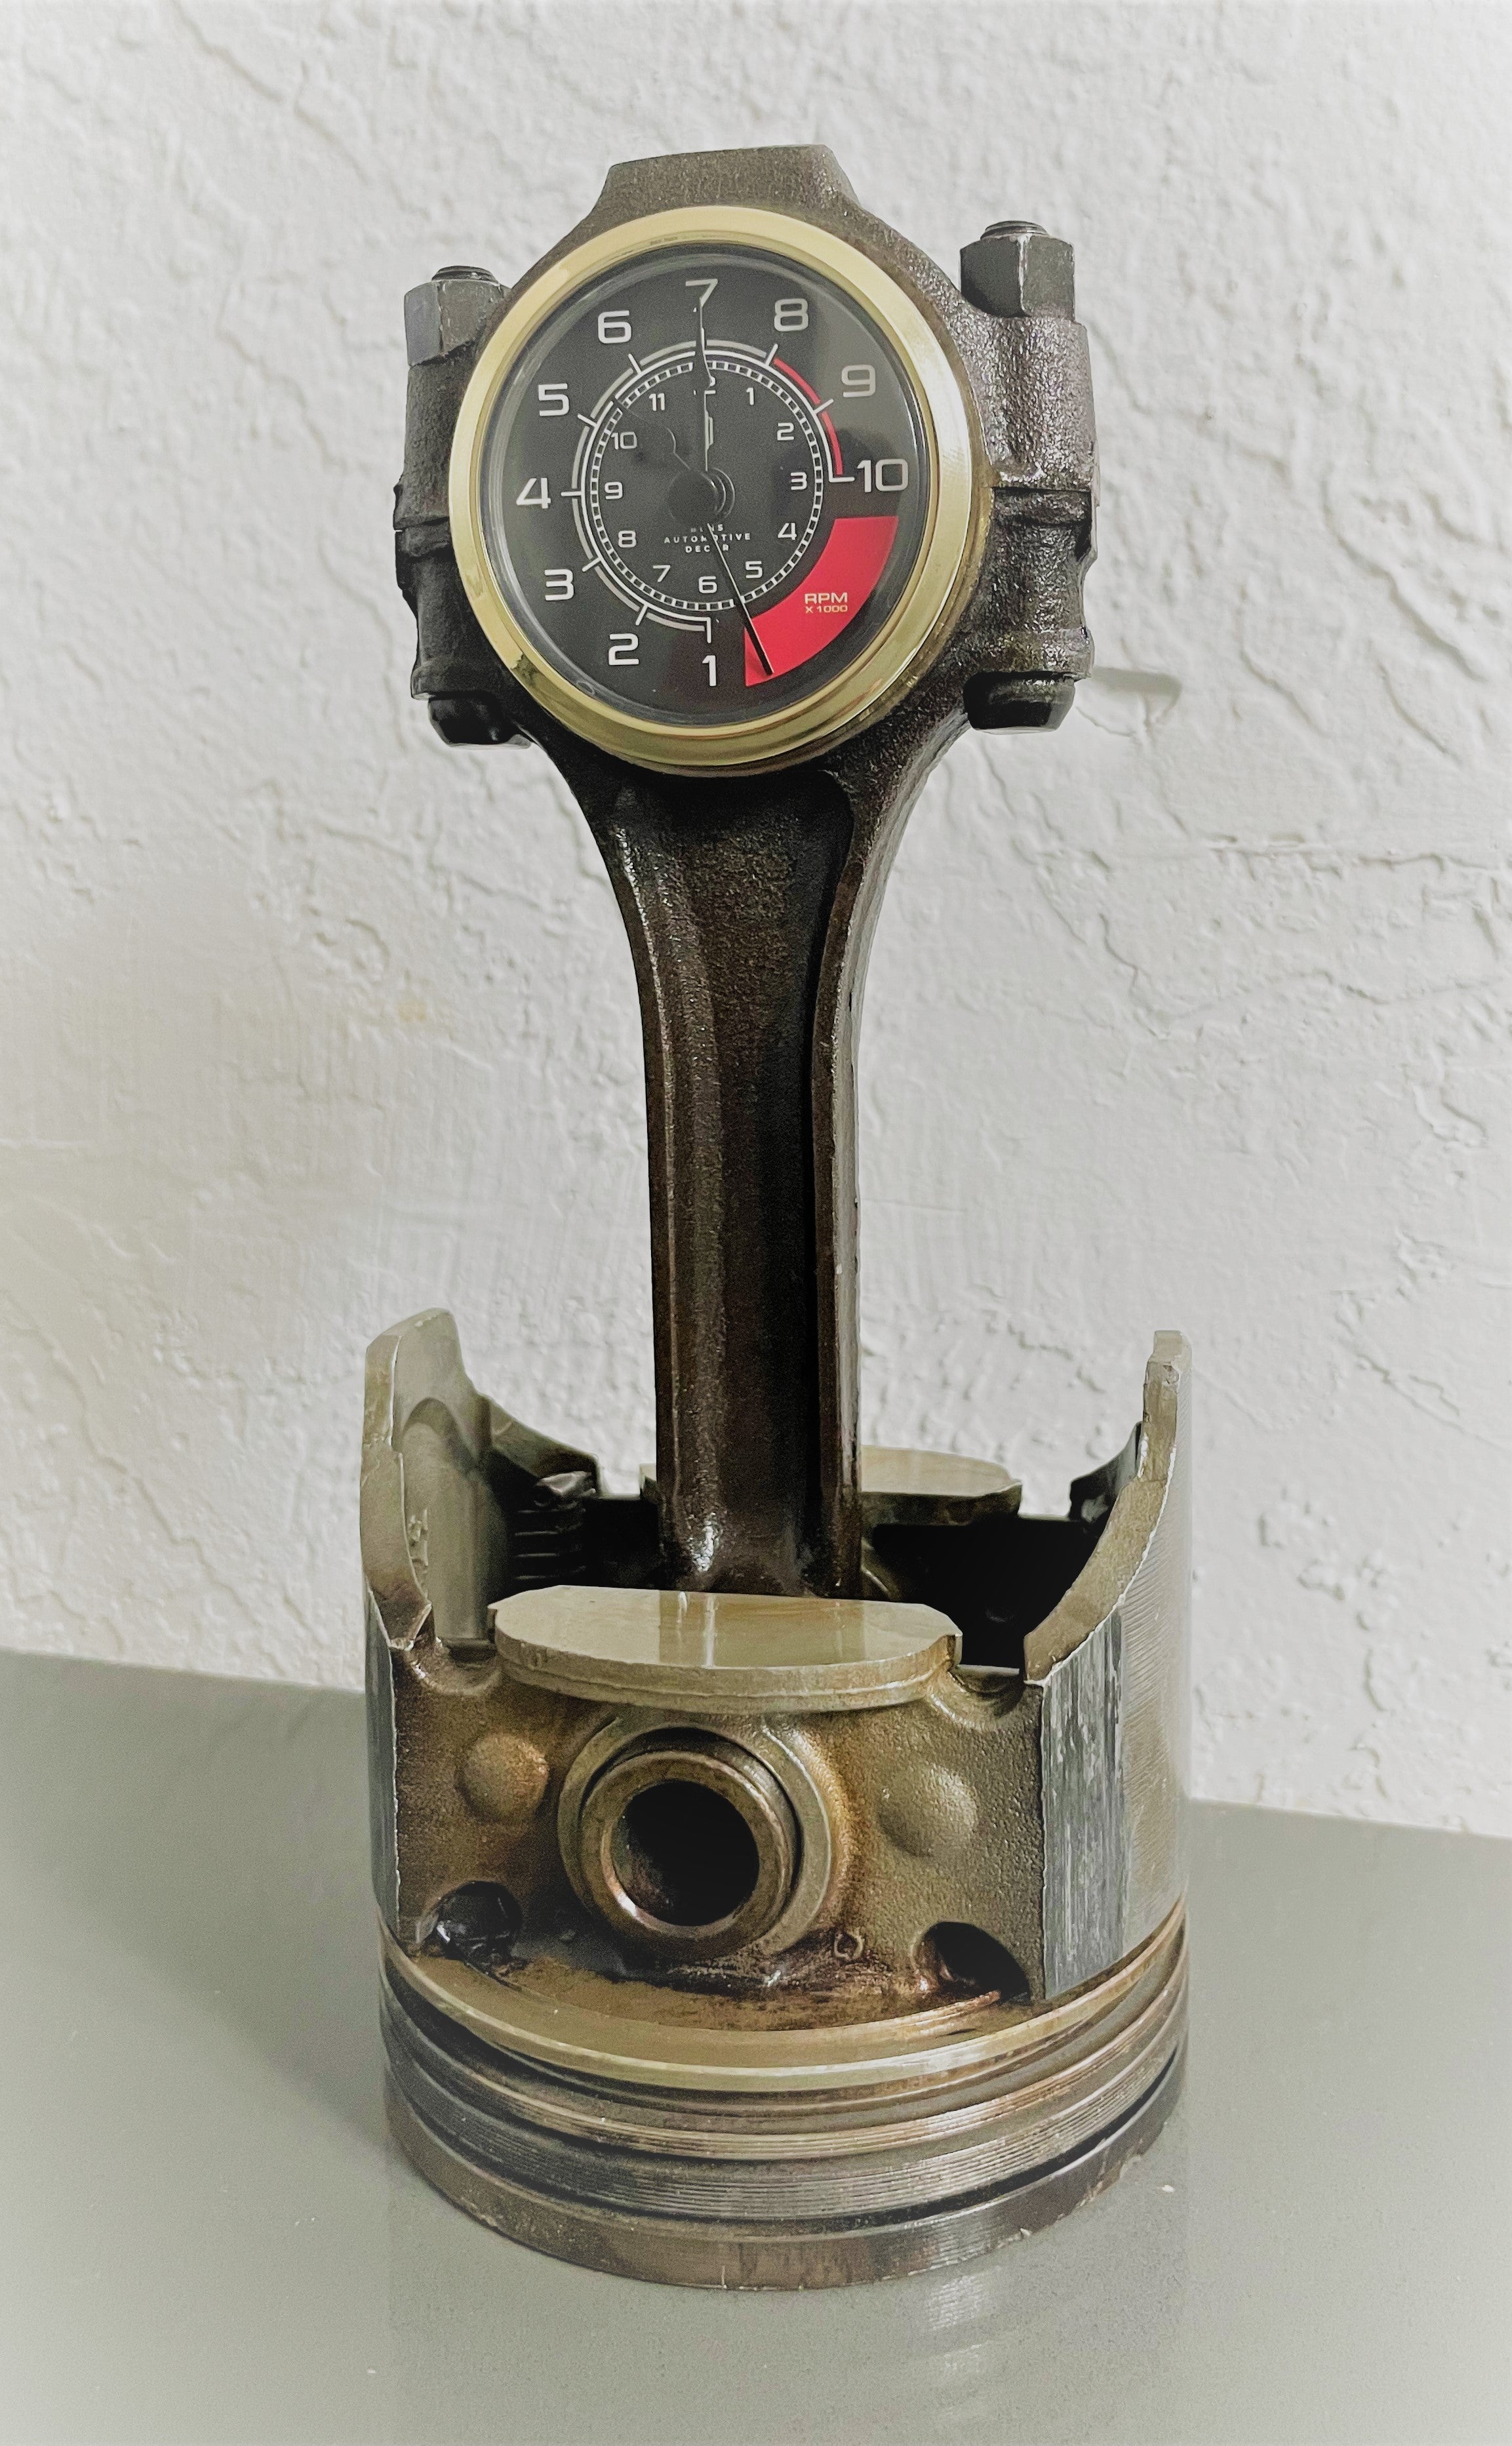 Desk clock made out of an Audi car engine piston, with a custom RPM clock face in a patina finish.